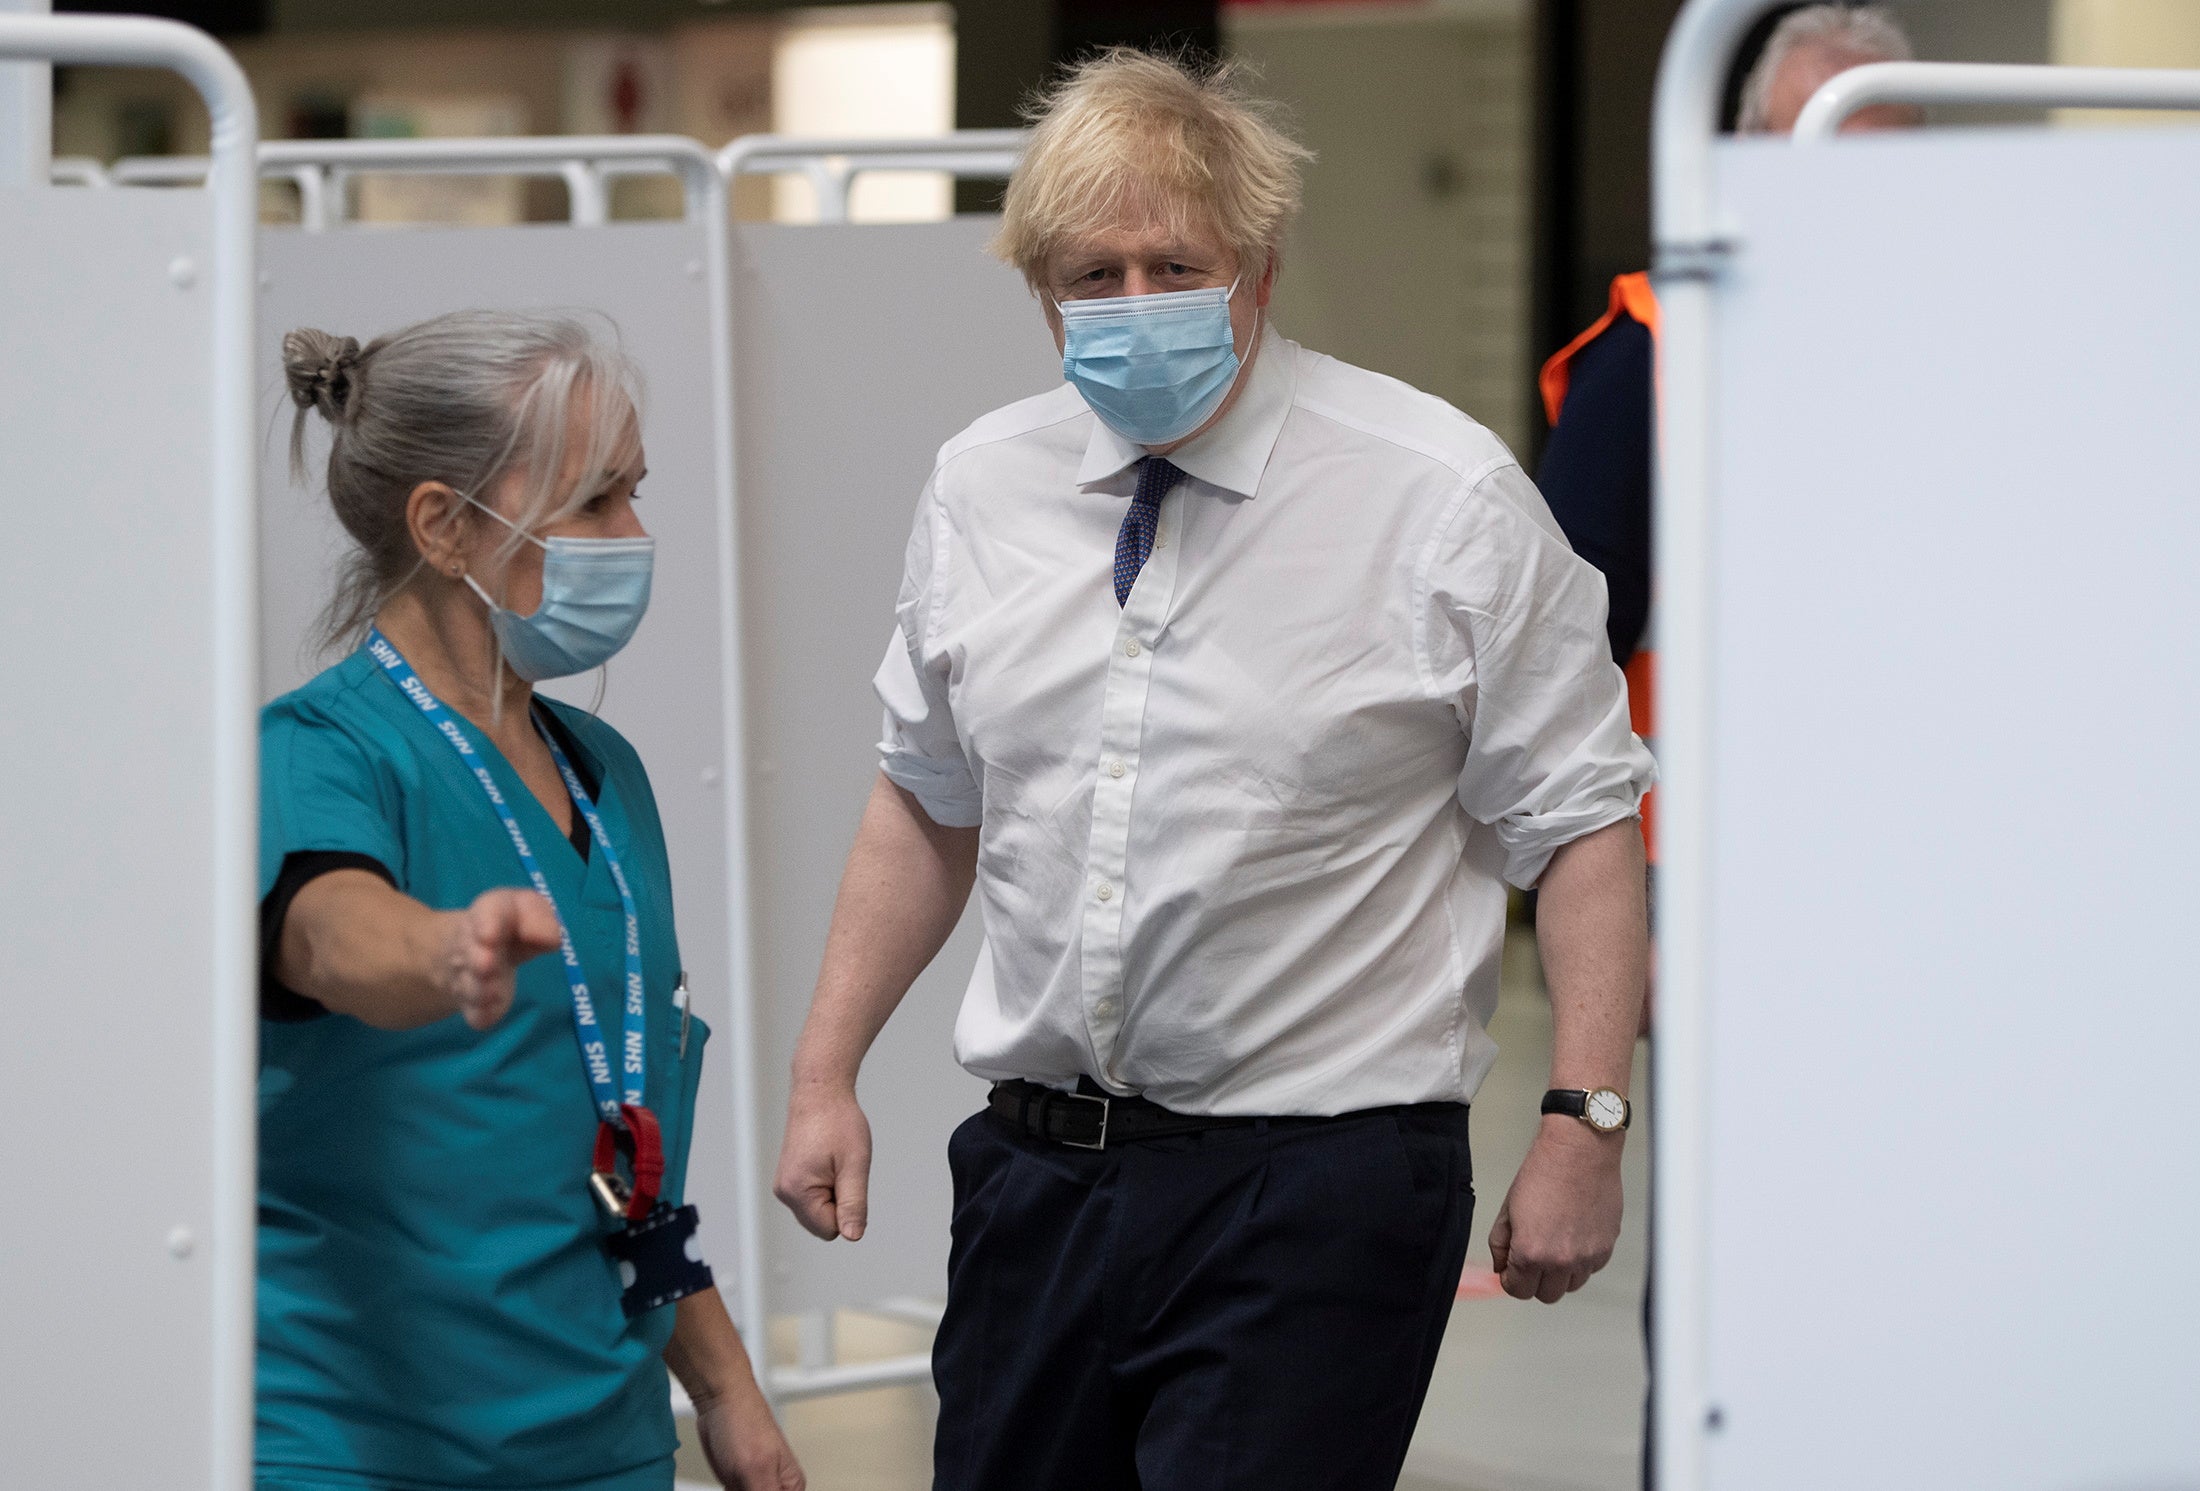 The prime minister must do more for the NHS than just be photographed in hospitals